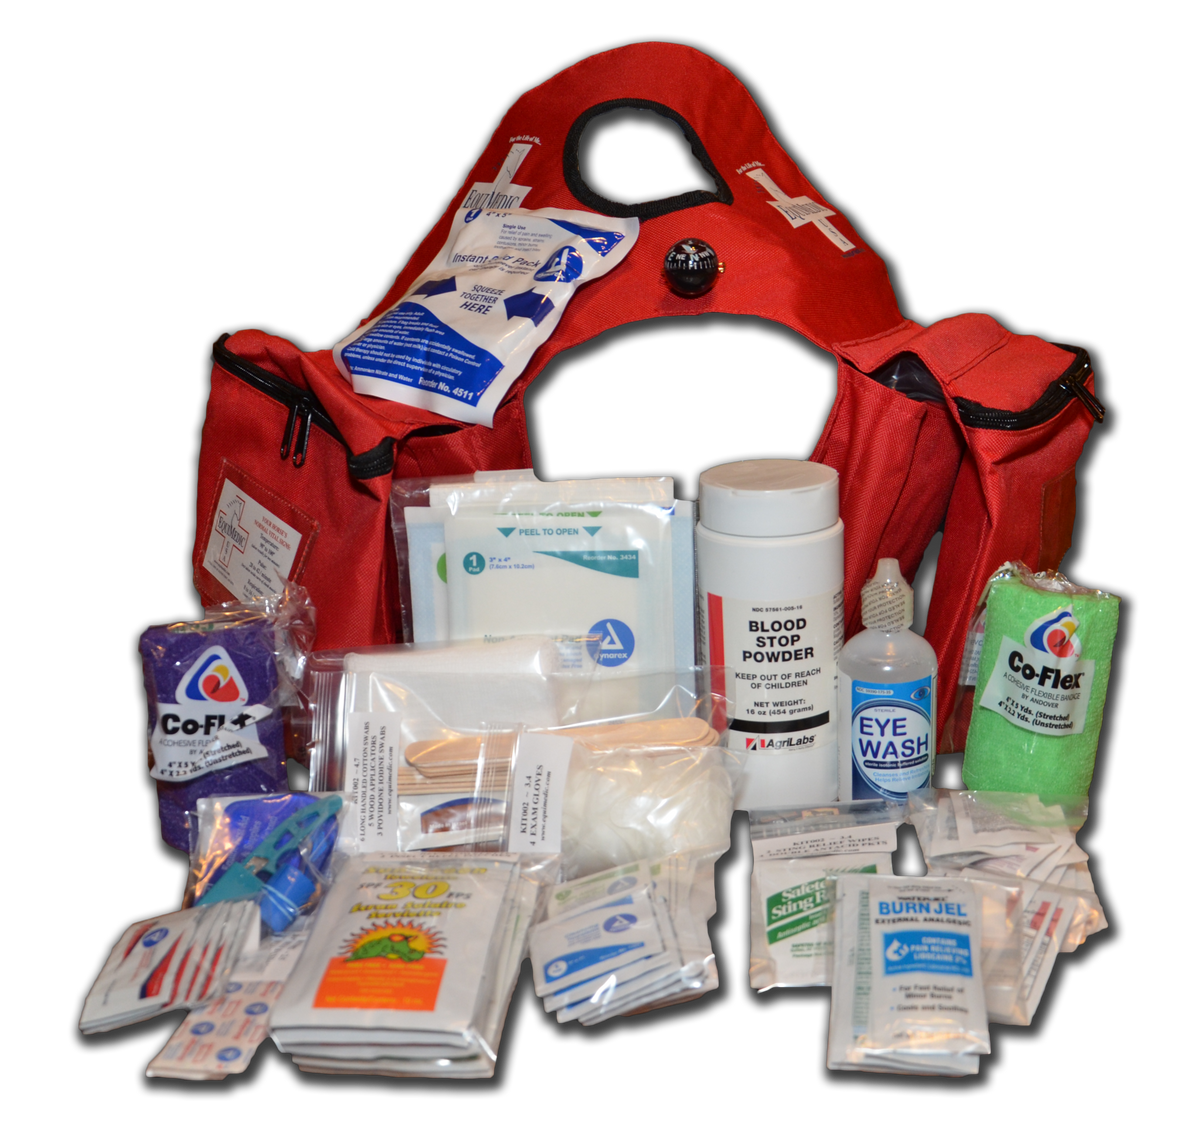 Trail Riding Equine First Aid Medical Kit